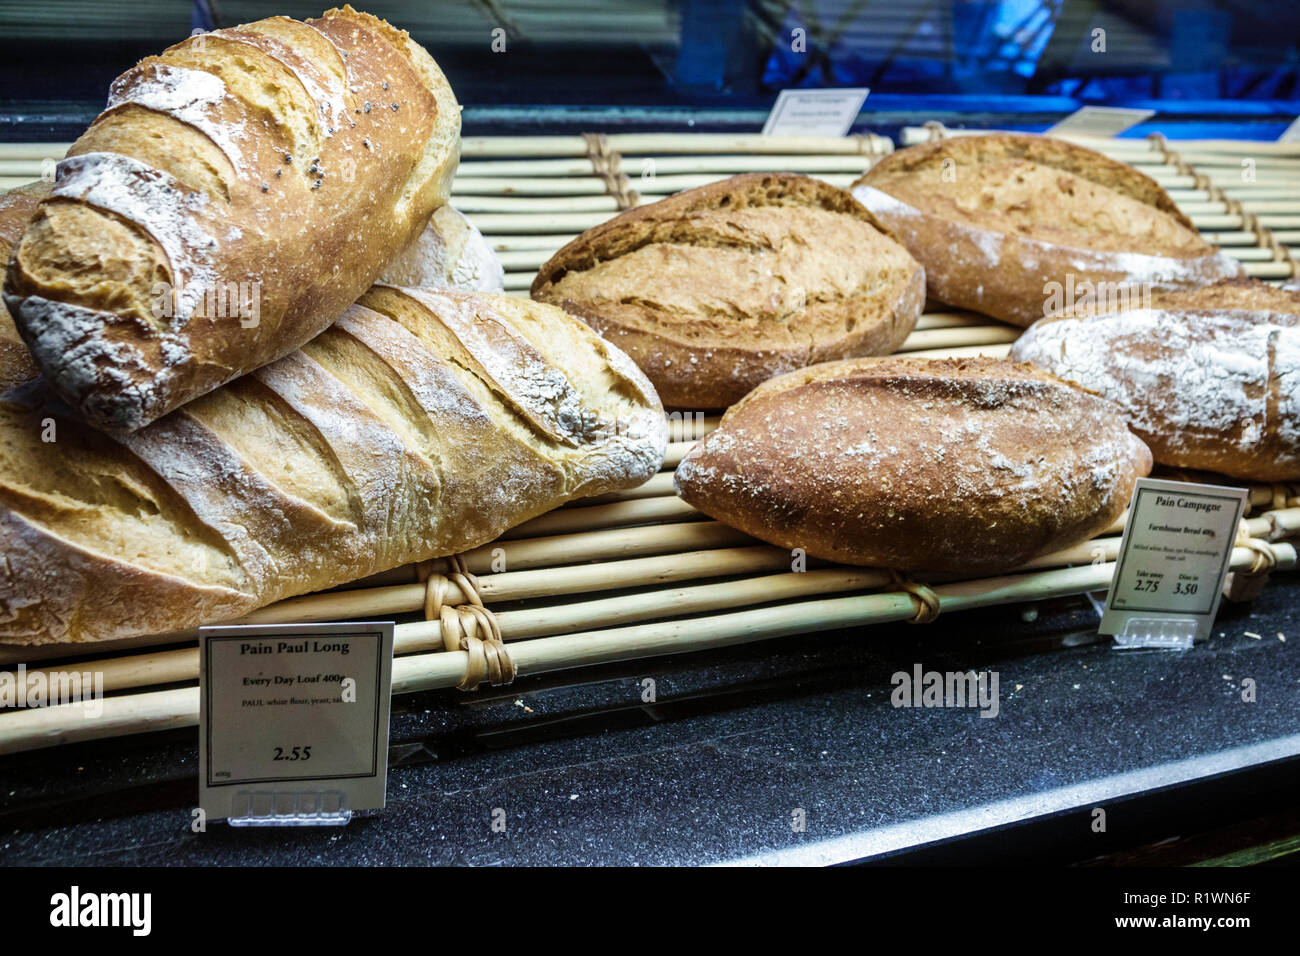 London England,UK,United Kingdom Great Britain,South Kensington,PAUL Bakery & Cafe,loaf,artisanal,pain de campagne,farmhouse bread,product products di Stock Photo